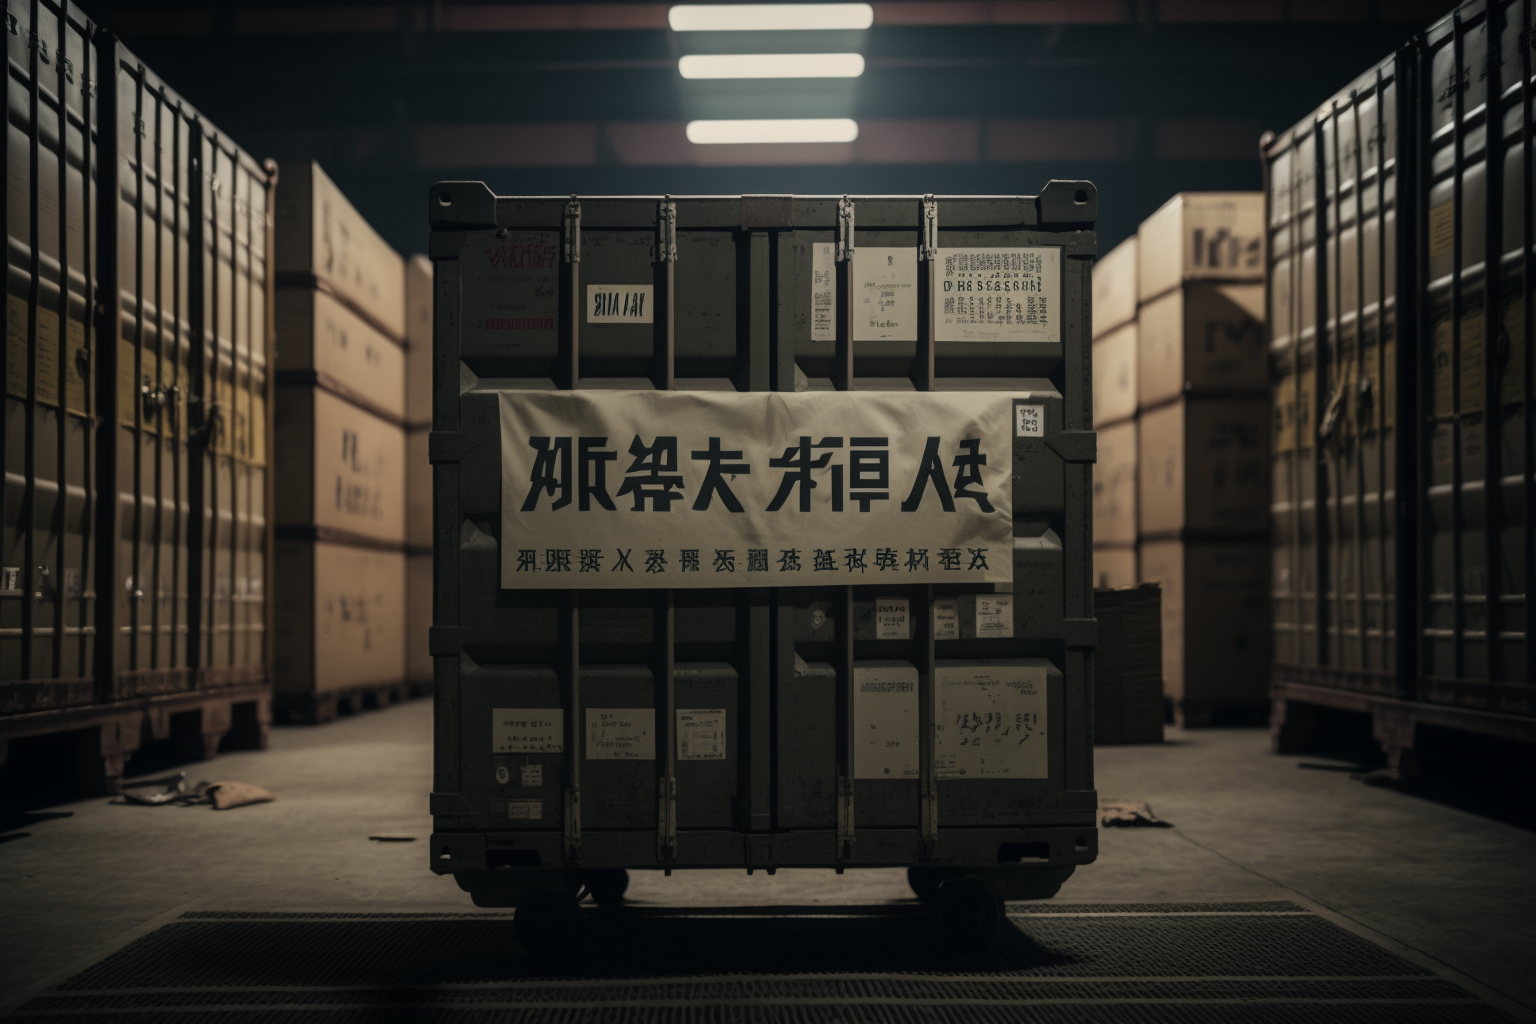 Cargo in a container